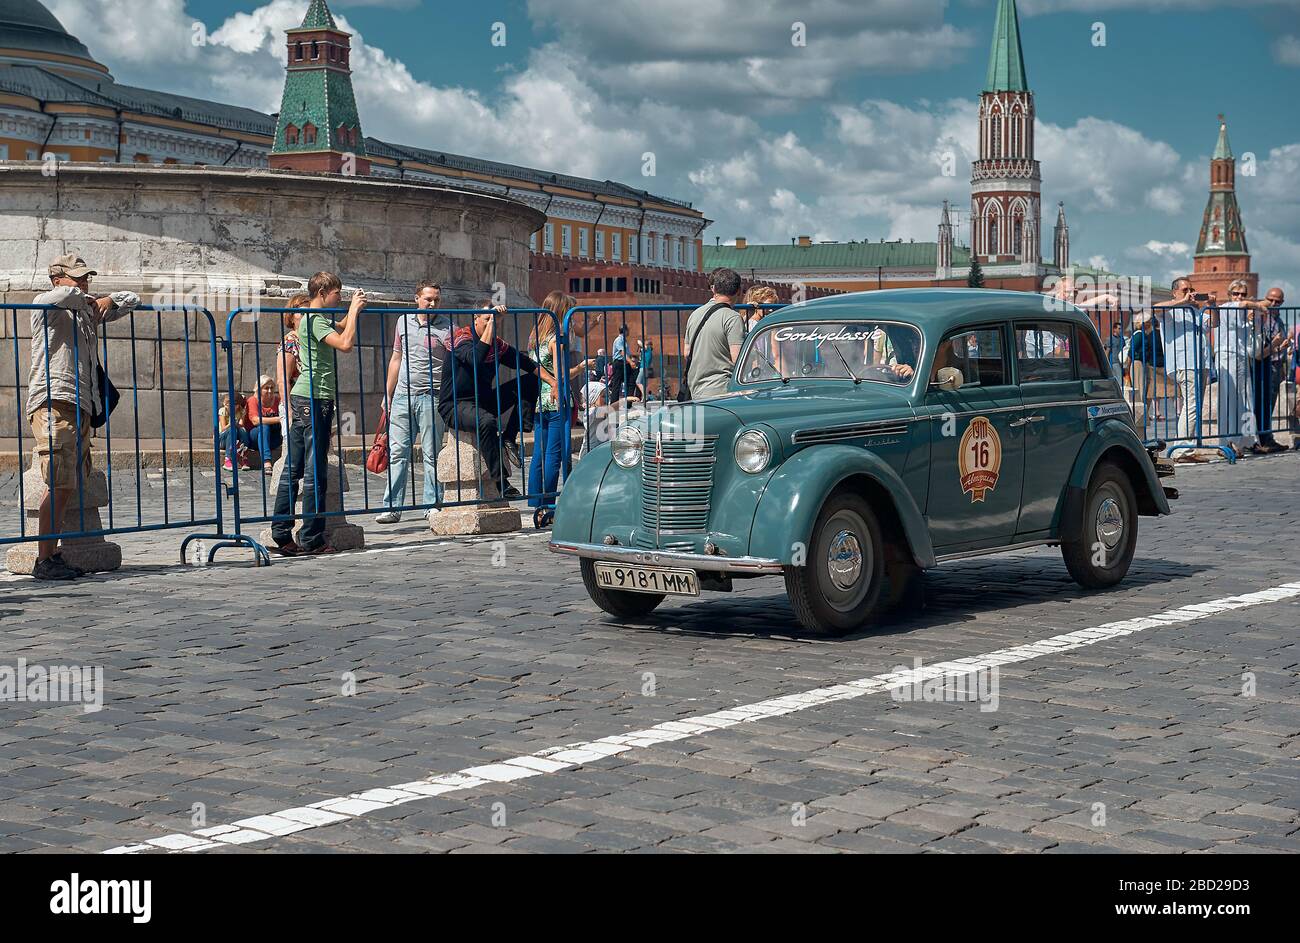 Moscow, Russia, Moskvich-401, 1947-1956, Gorkyclassic vintage car race through the city streets, stylized Stock Photo